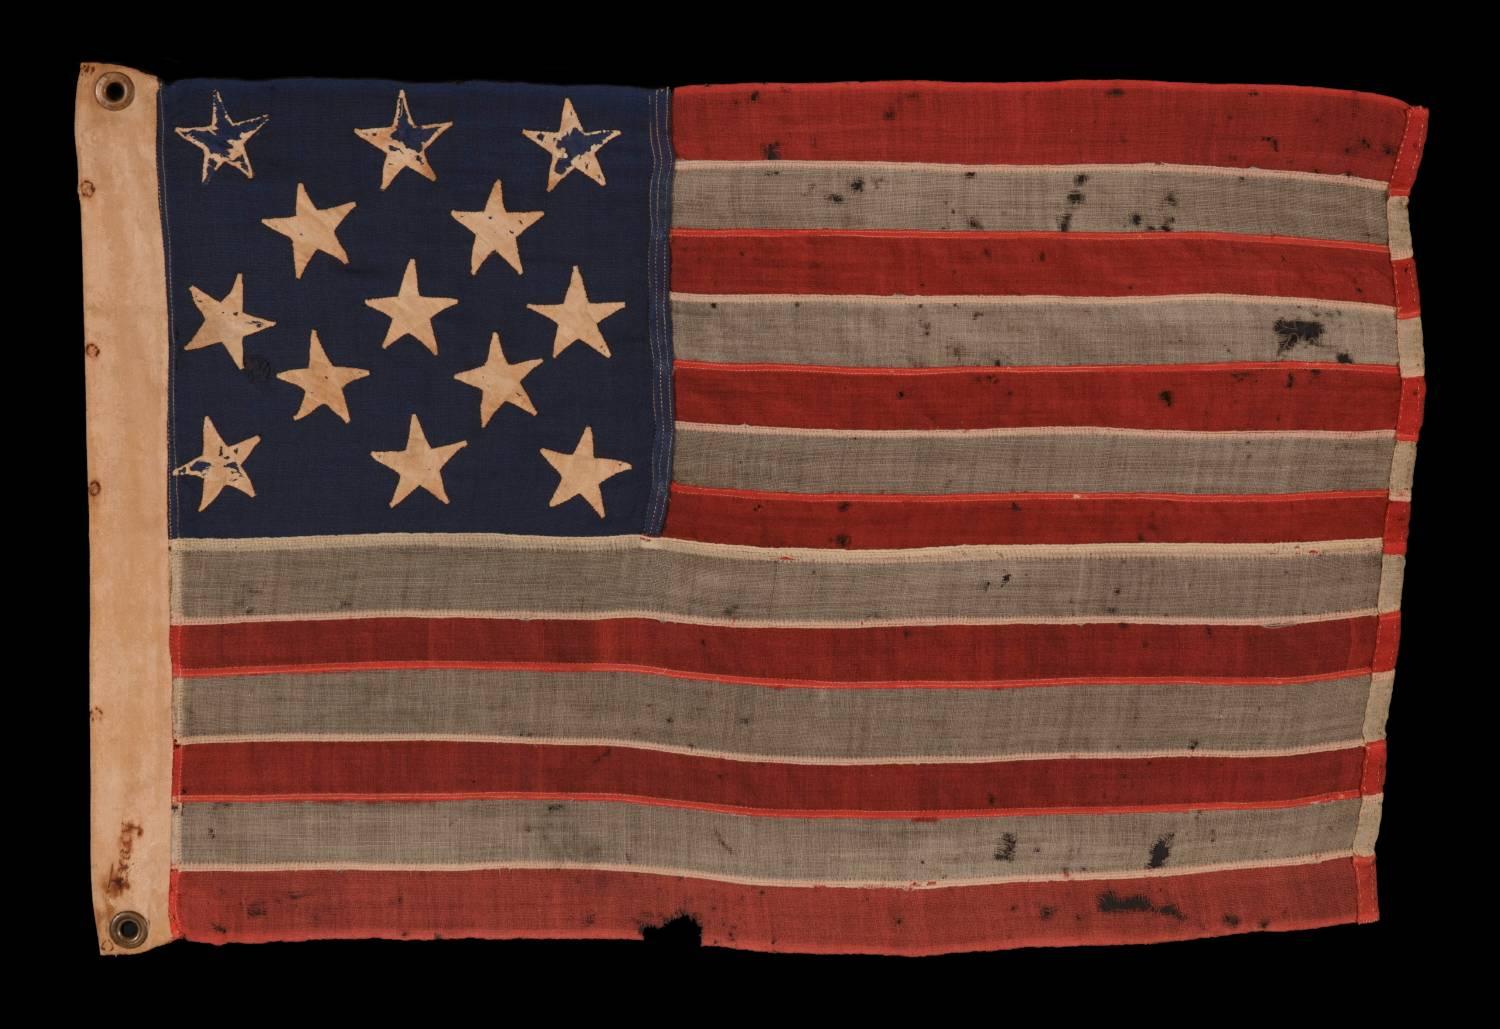 13 hand-sewn stars in a 3-2-3-2-3 pattern on an antique American flag with endearing wear from long-term use, and in an extraordinarily small amoung it's pieced-and-sewn counterparts, probably made during the American civil war (1861-65), though